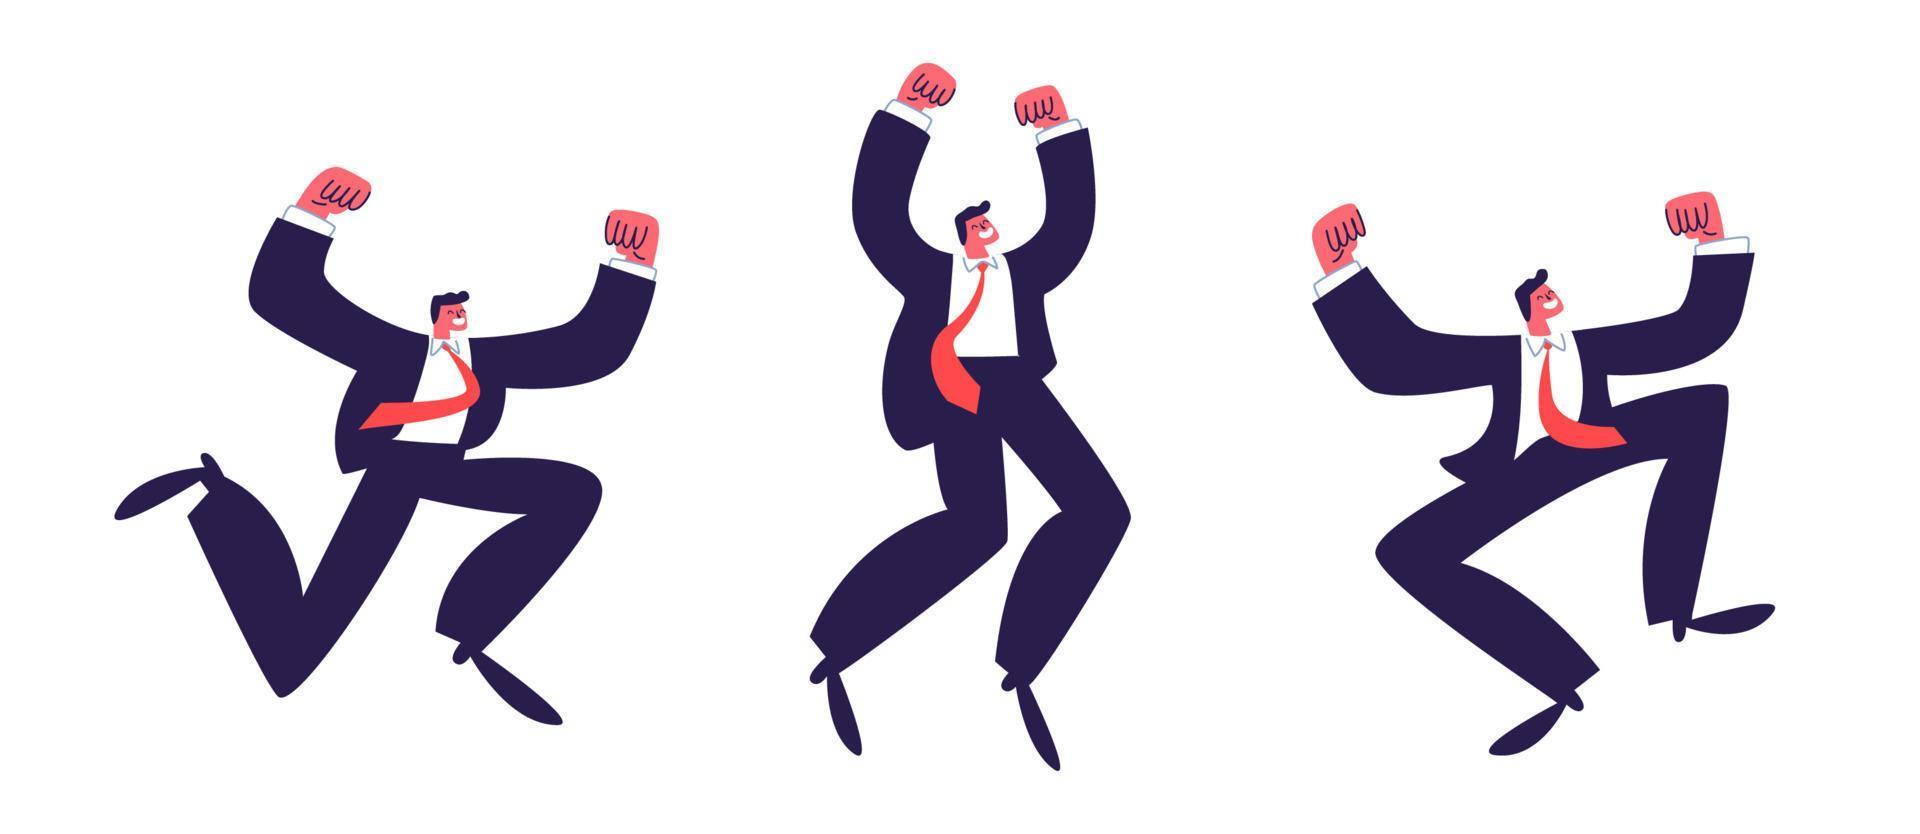 Jumping men. A set of victorious men in suits in a red tie raised their hands emotionally. Vector stock illustration isolated on white background.